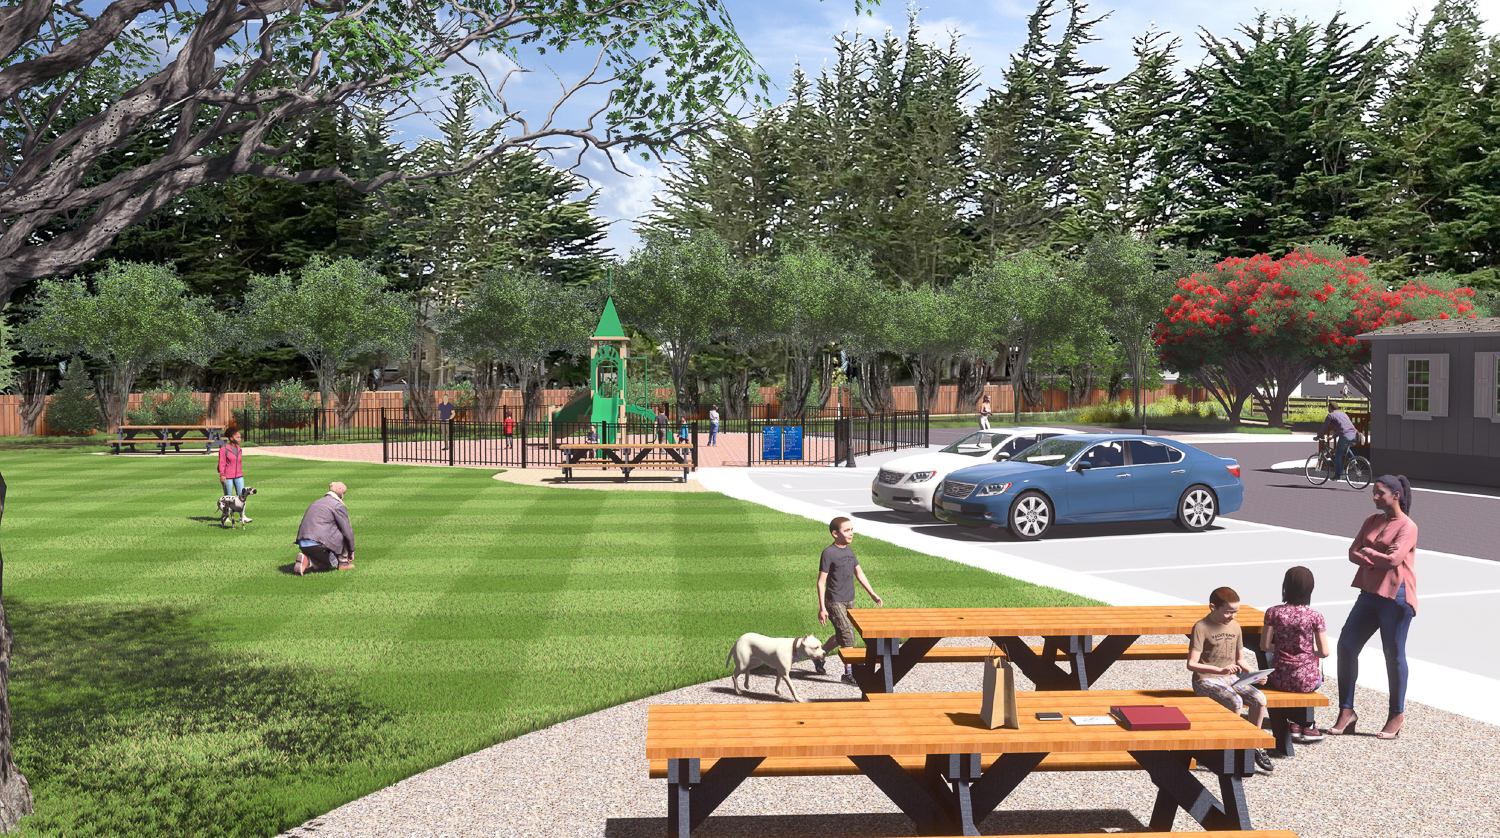 Stone Pine Cove community park, rendering by Bigfoot Homes